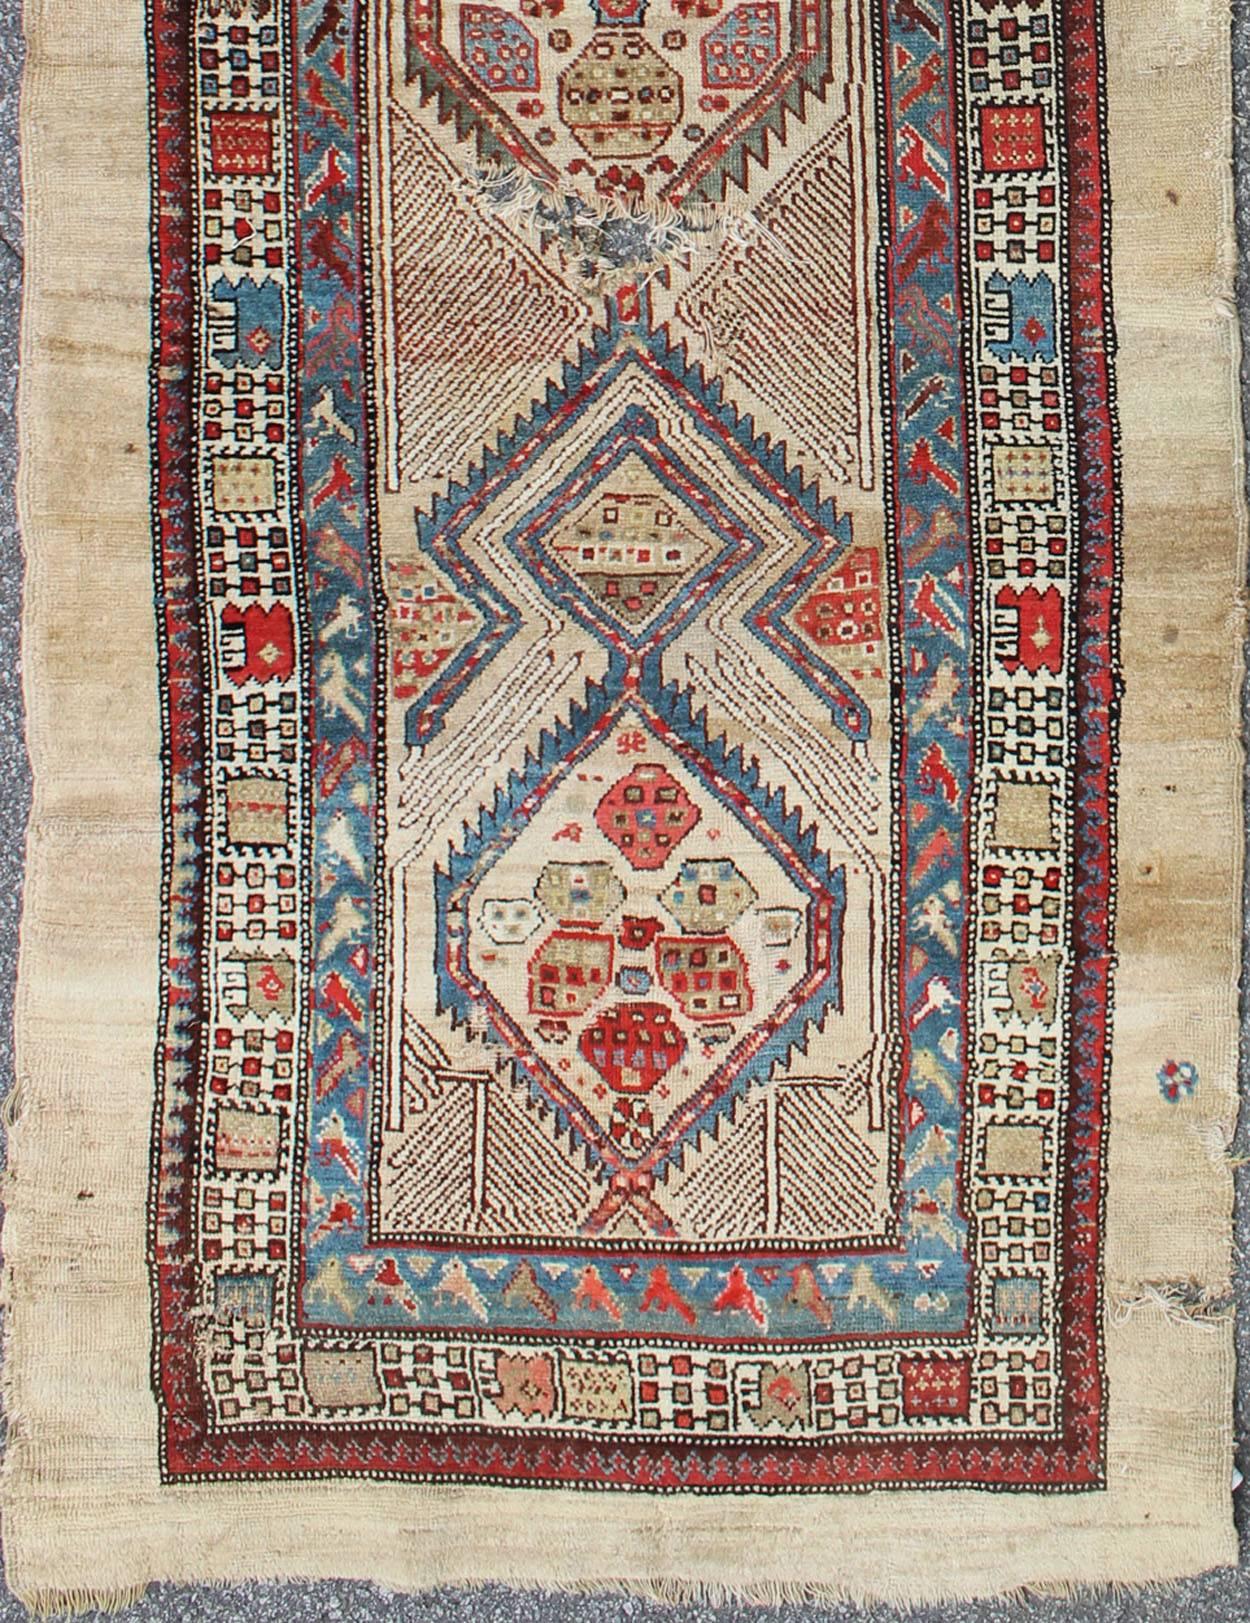 This beautiful antique Serab, antique mid-19th century Persian Serab, runner rests on a camel background, which surrounds the three medallions of alternating ivory, red, and blue colors. The main border is composed of ivory with a repeating